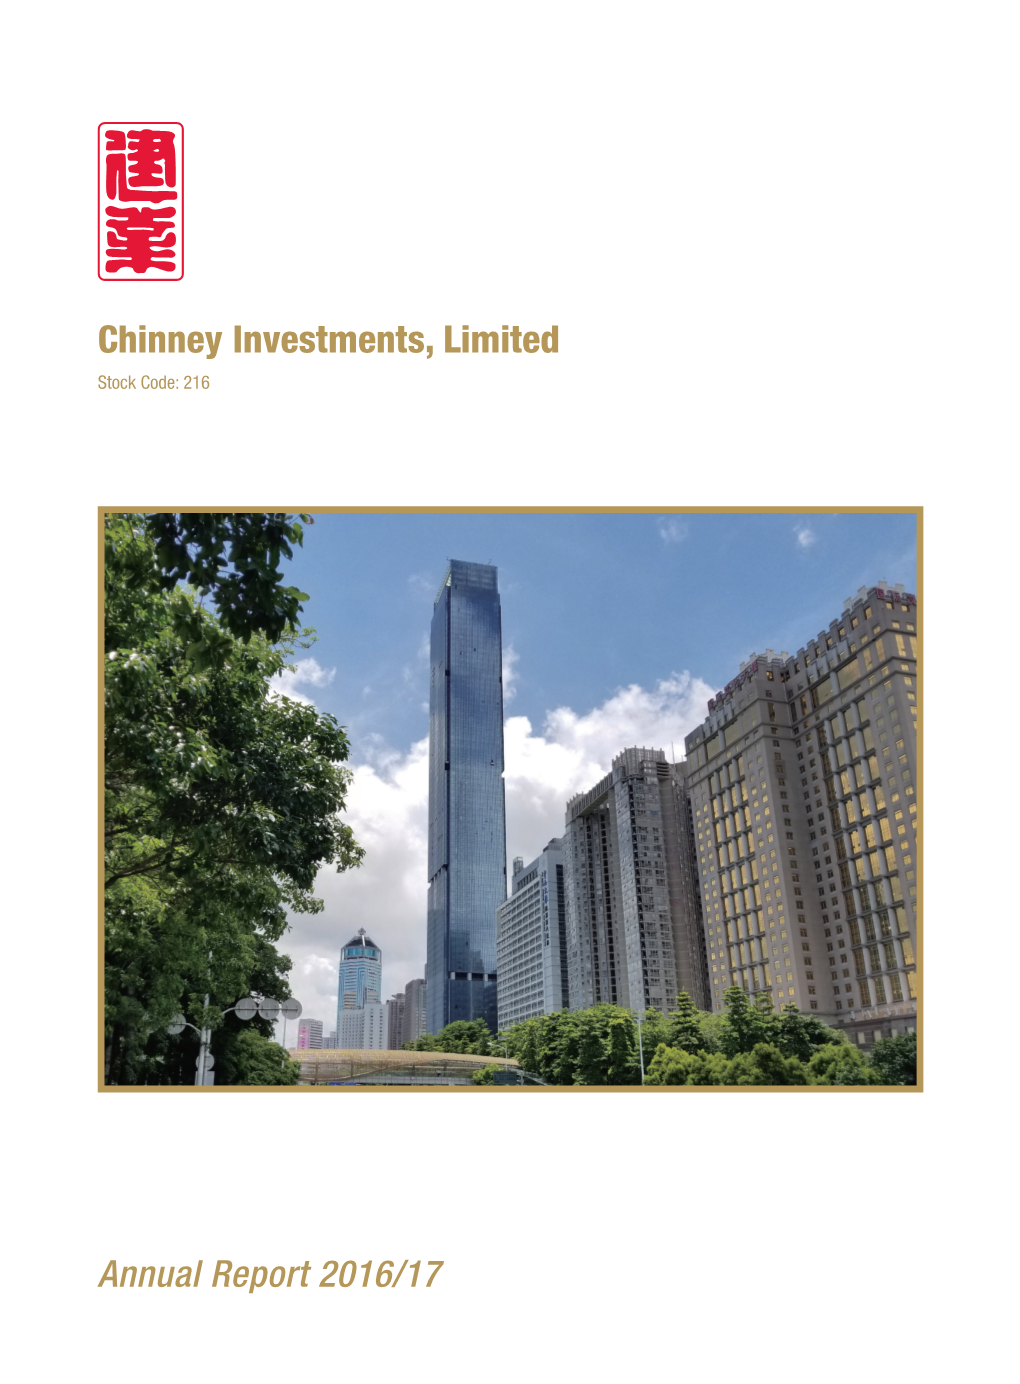 Chinney Investments, Limited Stock Code: 216